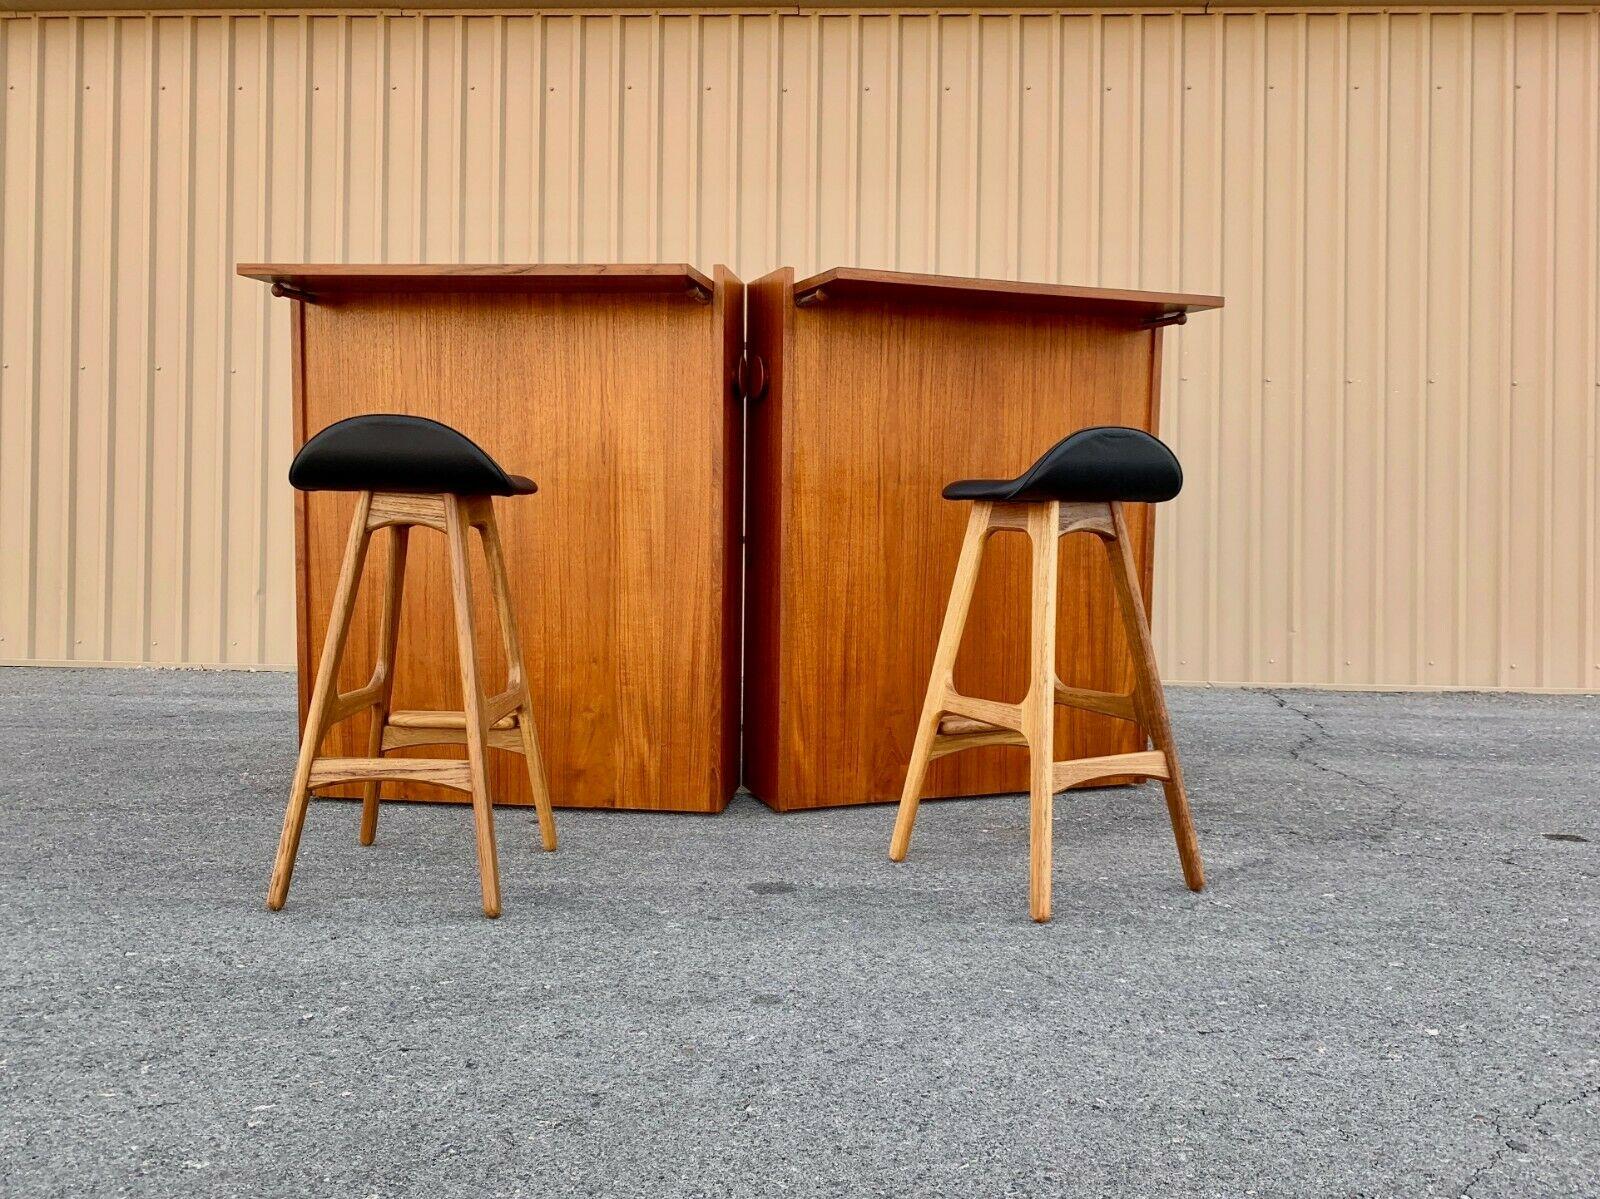 Bar in a box, a very rare and clever Danish design by Erik Buch for Dyrlund.


The cabinet is on small caster wheels which let the cabinet open very smoothly to reveal the bar. 4 small rods on the inside slide the cabinet push outward